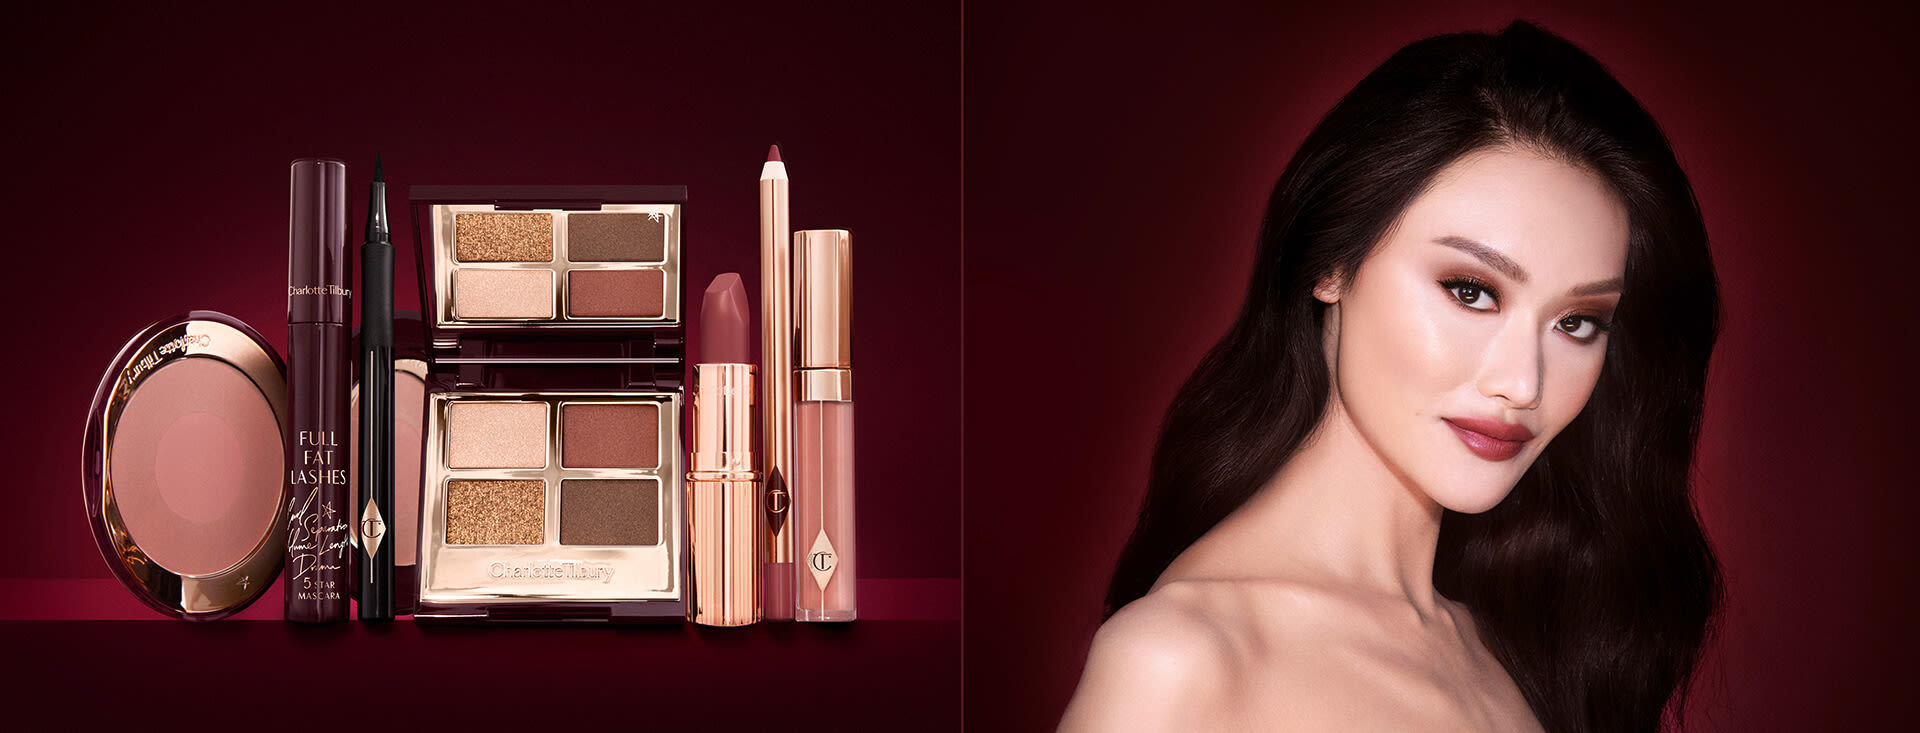 A fair-tone model with brown eyes wearing smokey brown and gold eye makeup with warm pink blush and glossy nude-pink lips next to a makeup kit that includes an open, mirrored-lid eyeshadow palette in matte and shimmery brown and gold shades, an open black eyeliner pen, a mascara in a dark-crimson colour scheme, a berry-rose lipstick with a matching lip liner pencil, nude pink lip gloss, and an open two-tone blush in warm pink. 